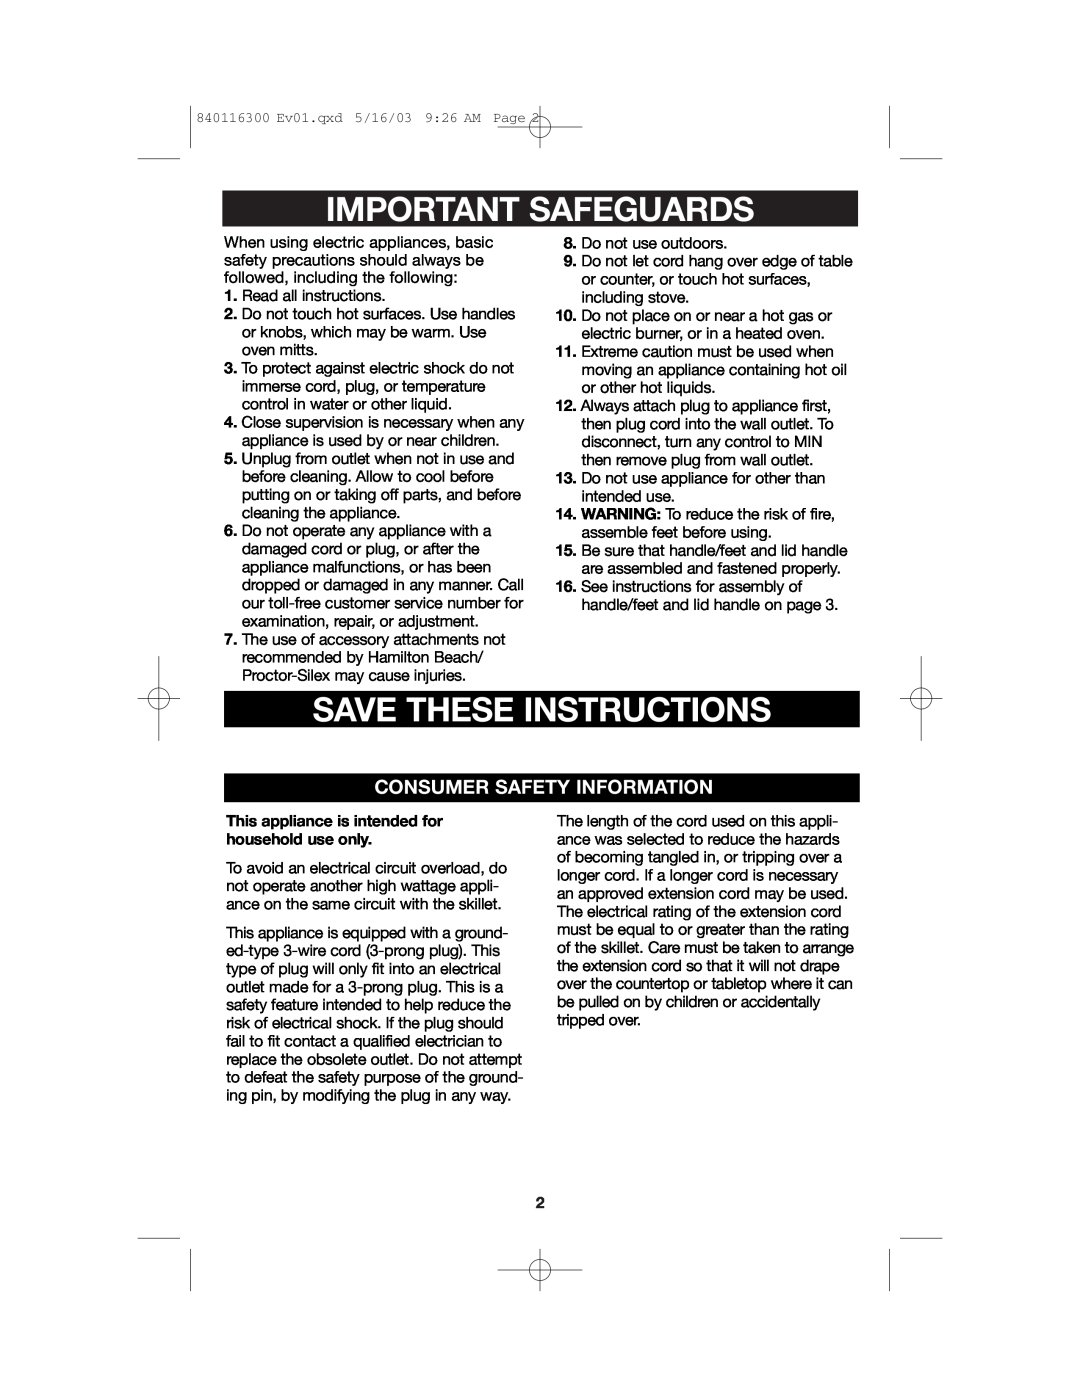 Proctor-Silex 840116300 manual Important Safeguards, Save These Instructions, Consumer Safety Information 